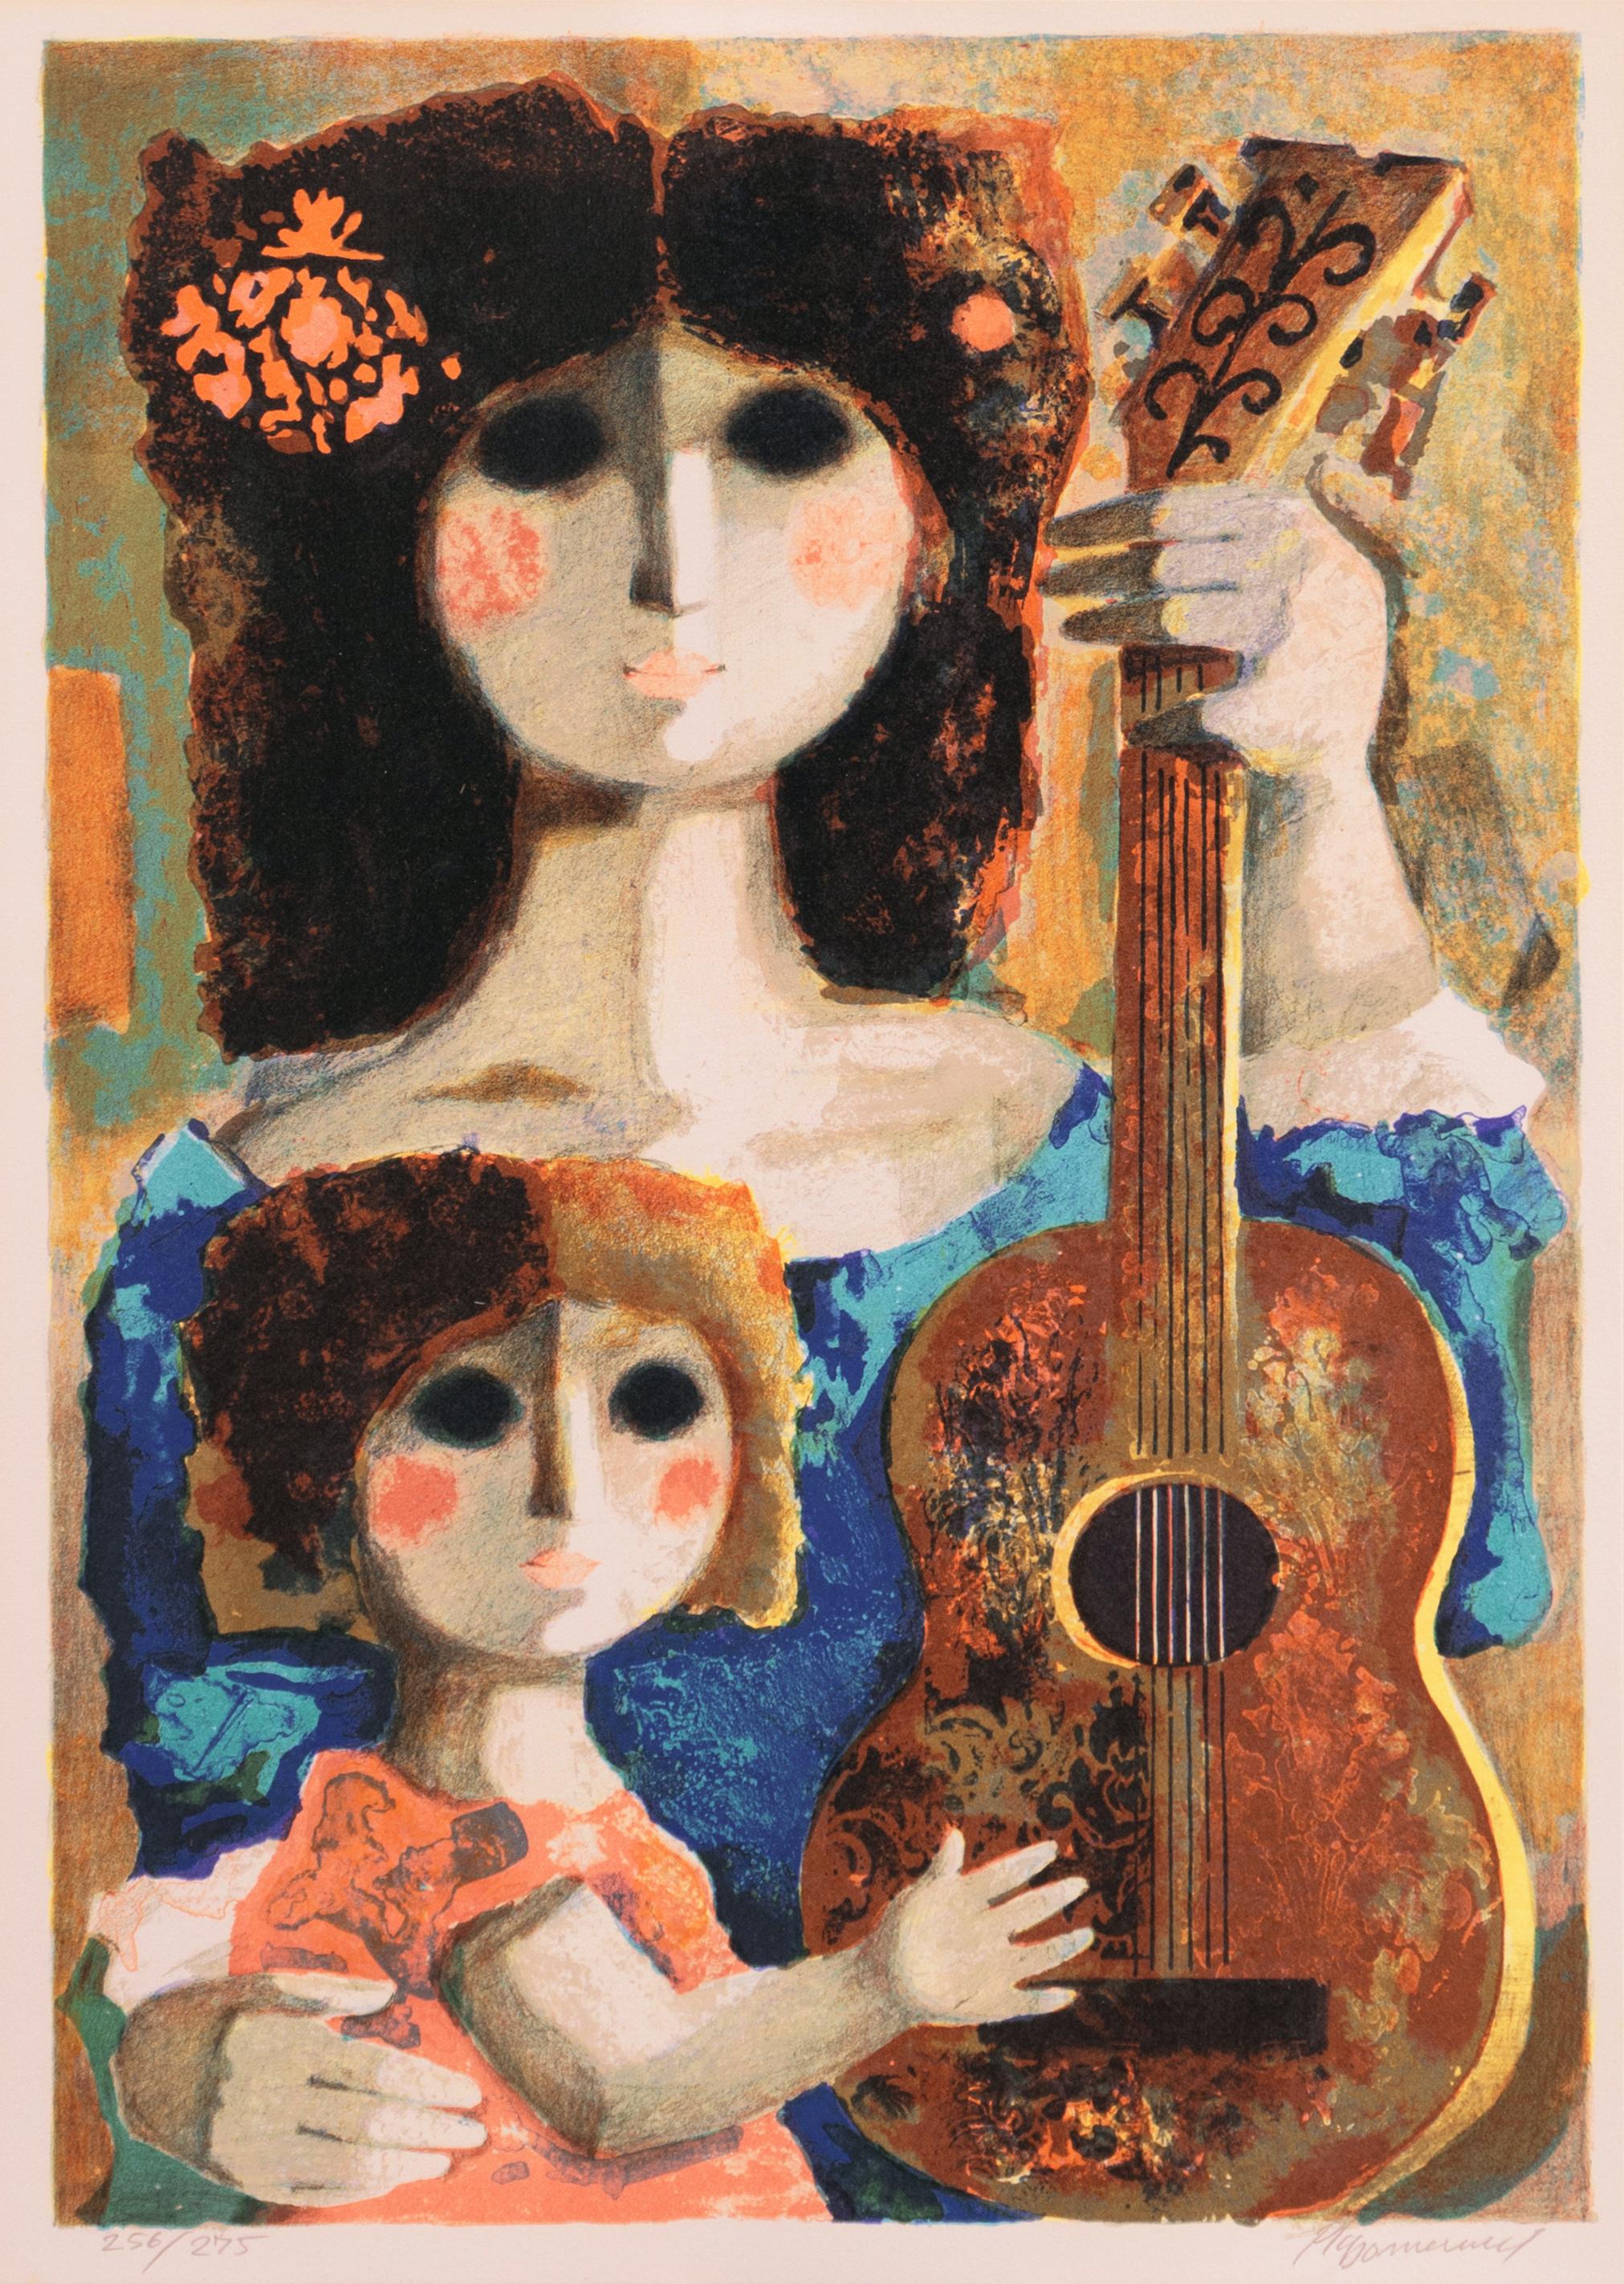 Jordi Pla Domènech Figurative Print - 'Mother and Child with Guitar', Figural, Barcelona, Venice, Chicago, New York